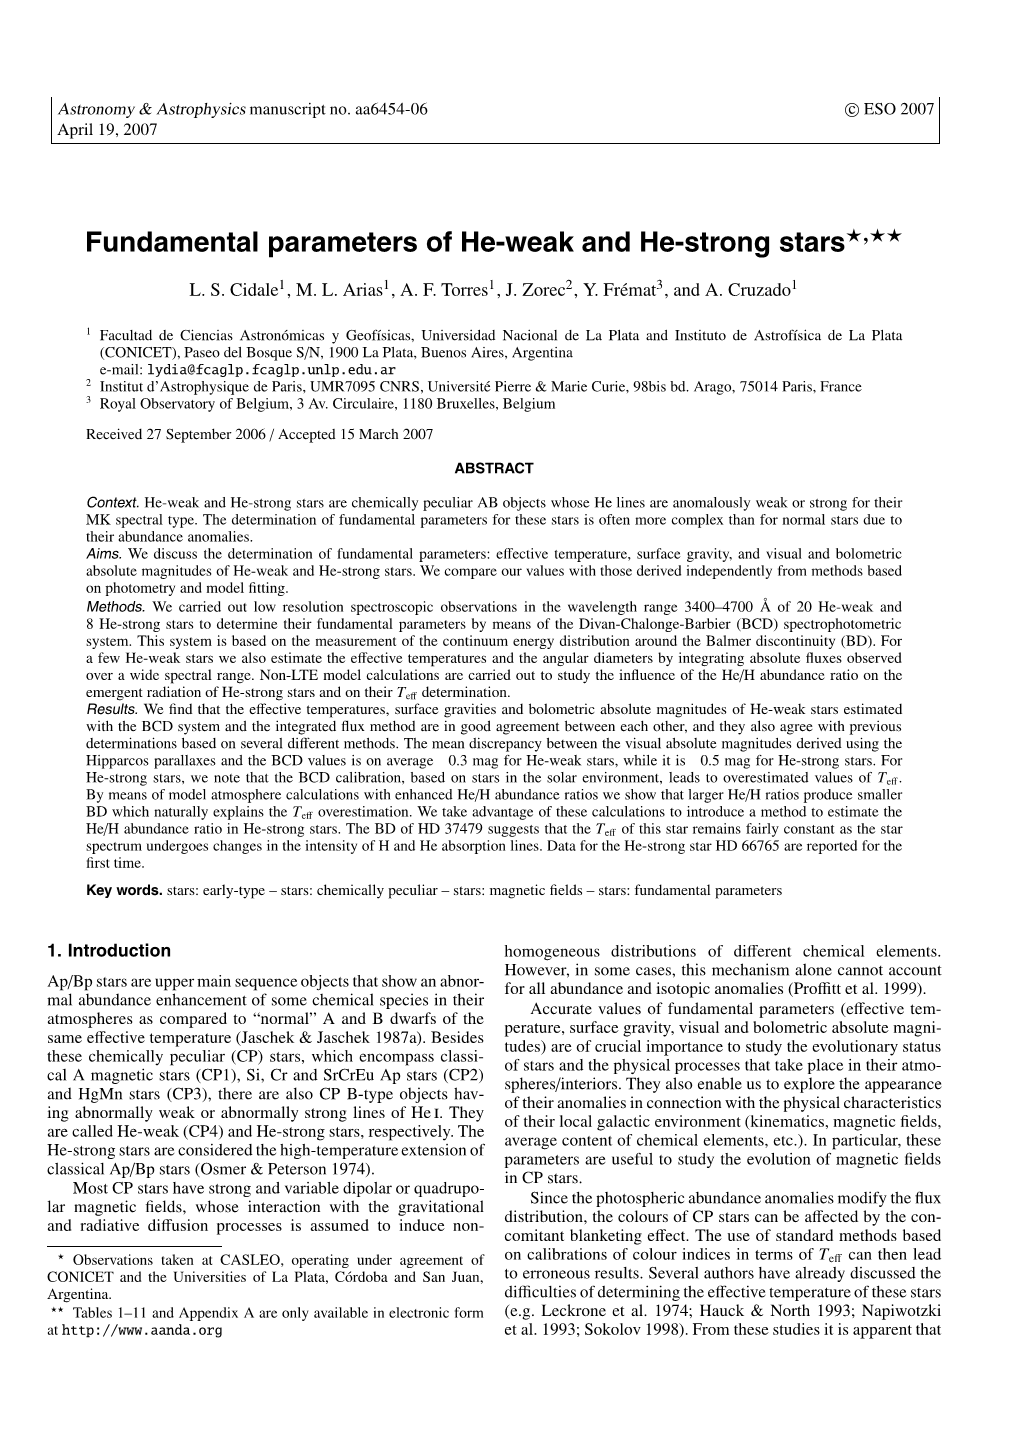 Fundamental Parameters of He-Weak and He-Strong Stars�,